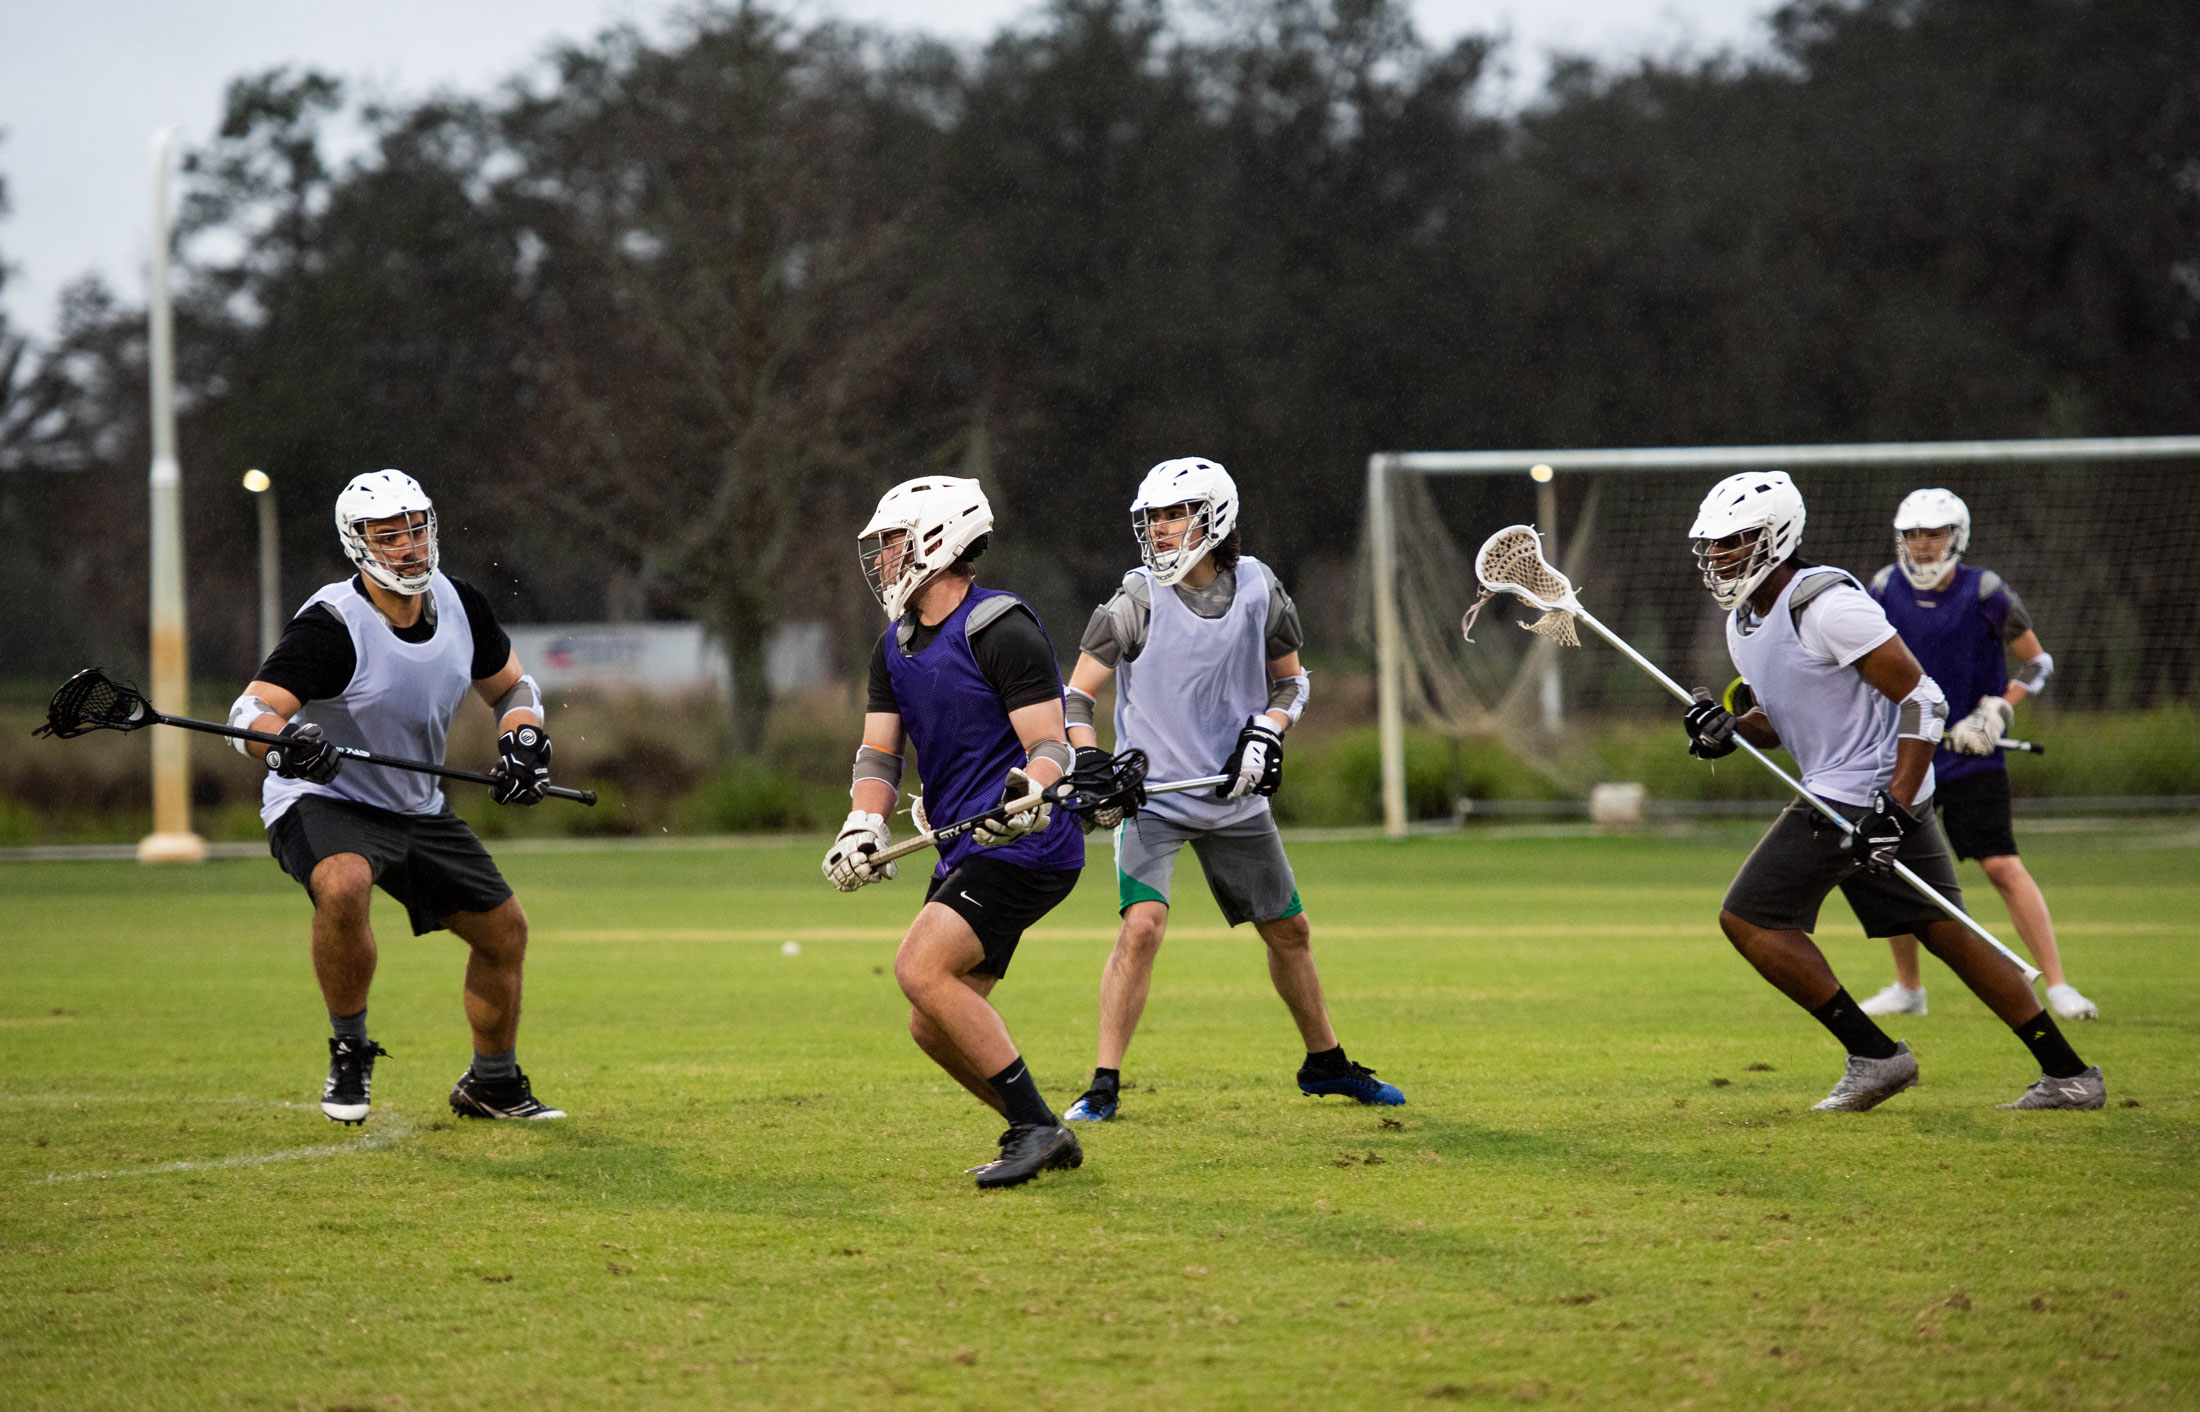 The Phoenix Lacrosse team plays its inaugural game on Feb. 19.